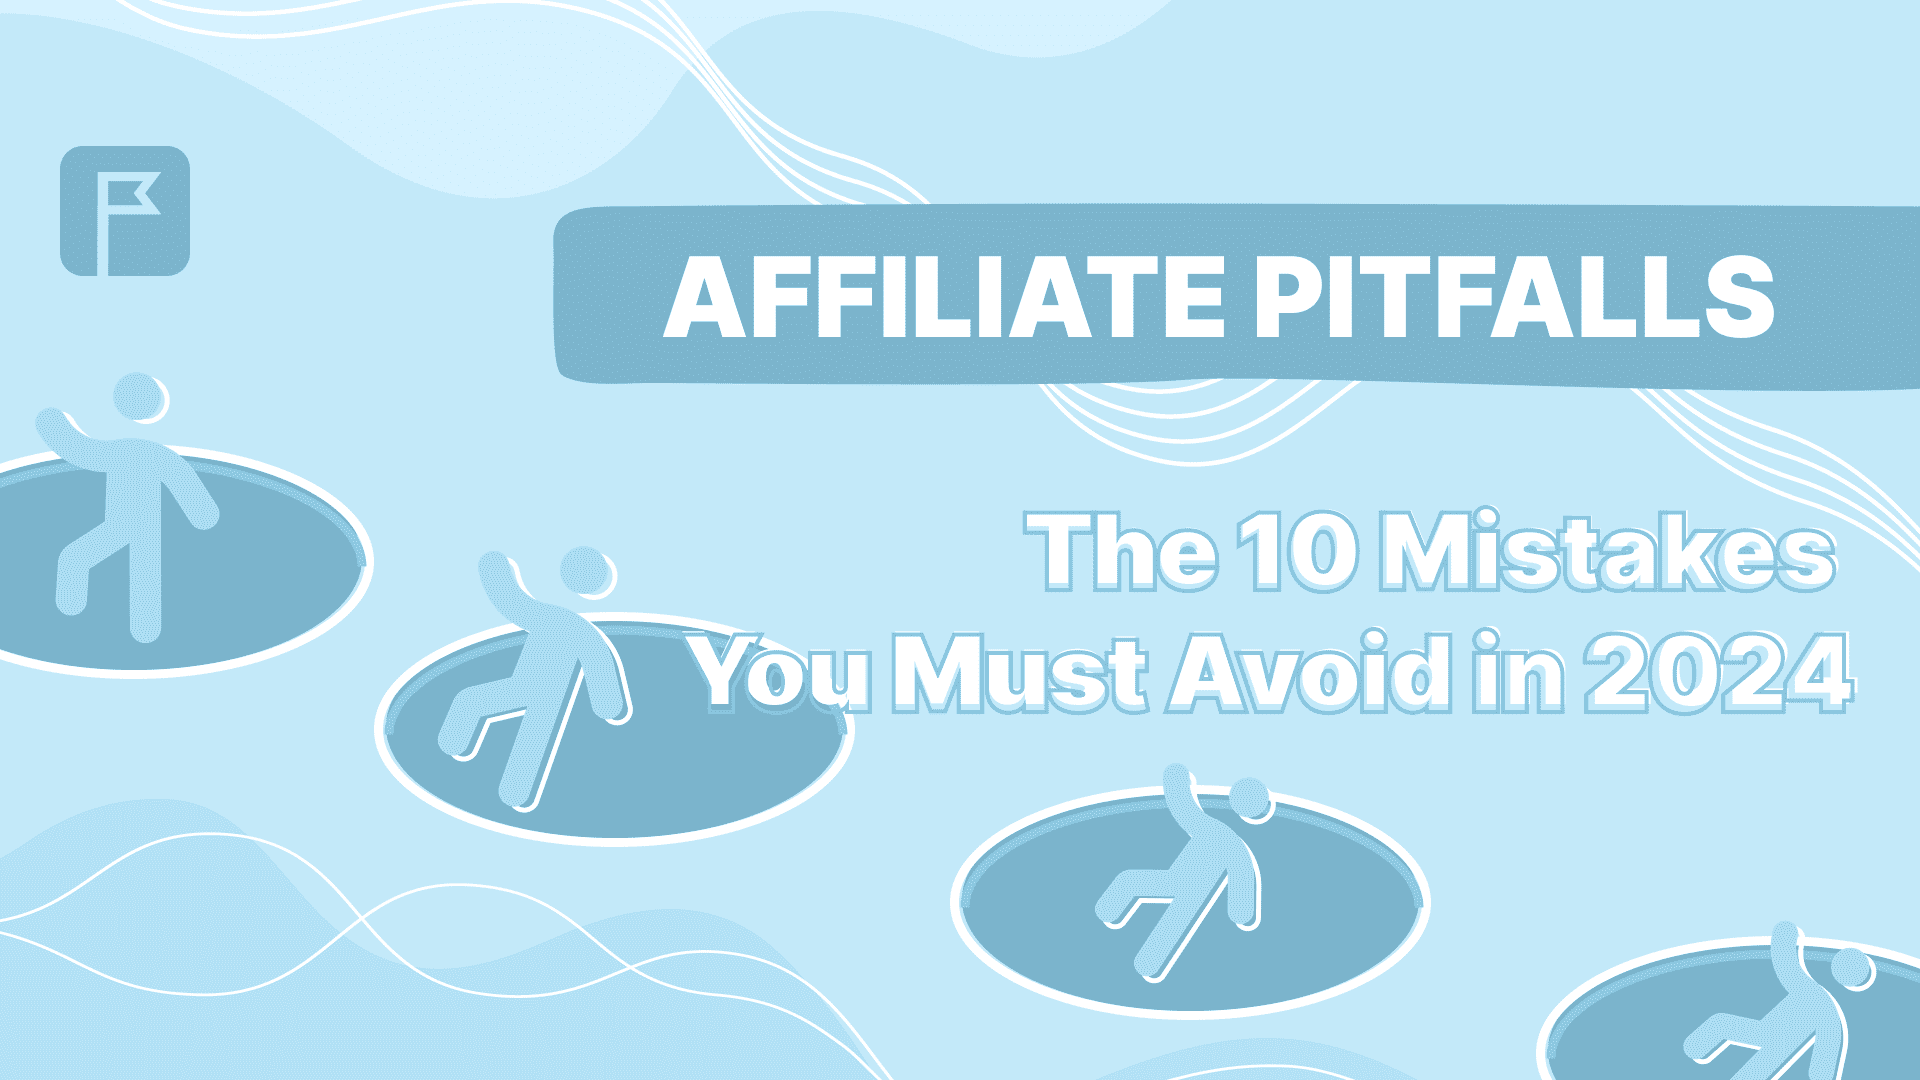 Affiliate Pitfalls: The 10 Mistakes You Must Avoid in 2024